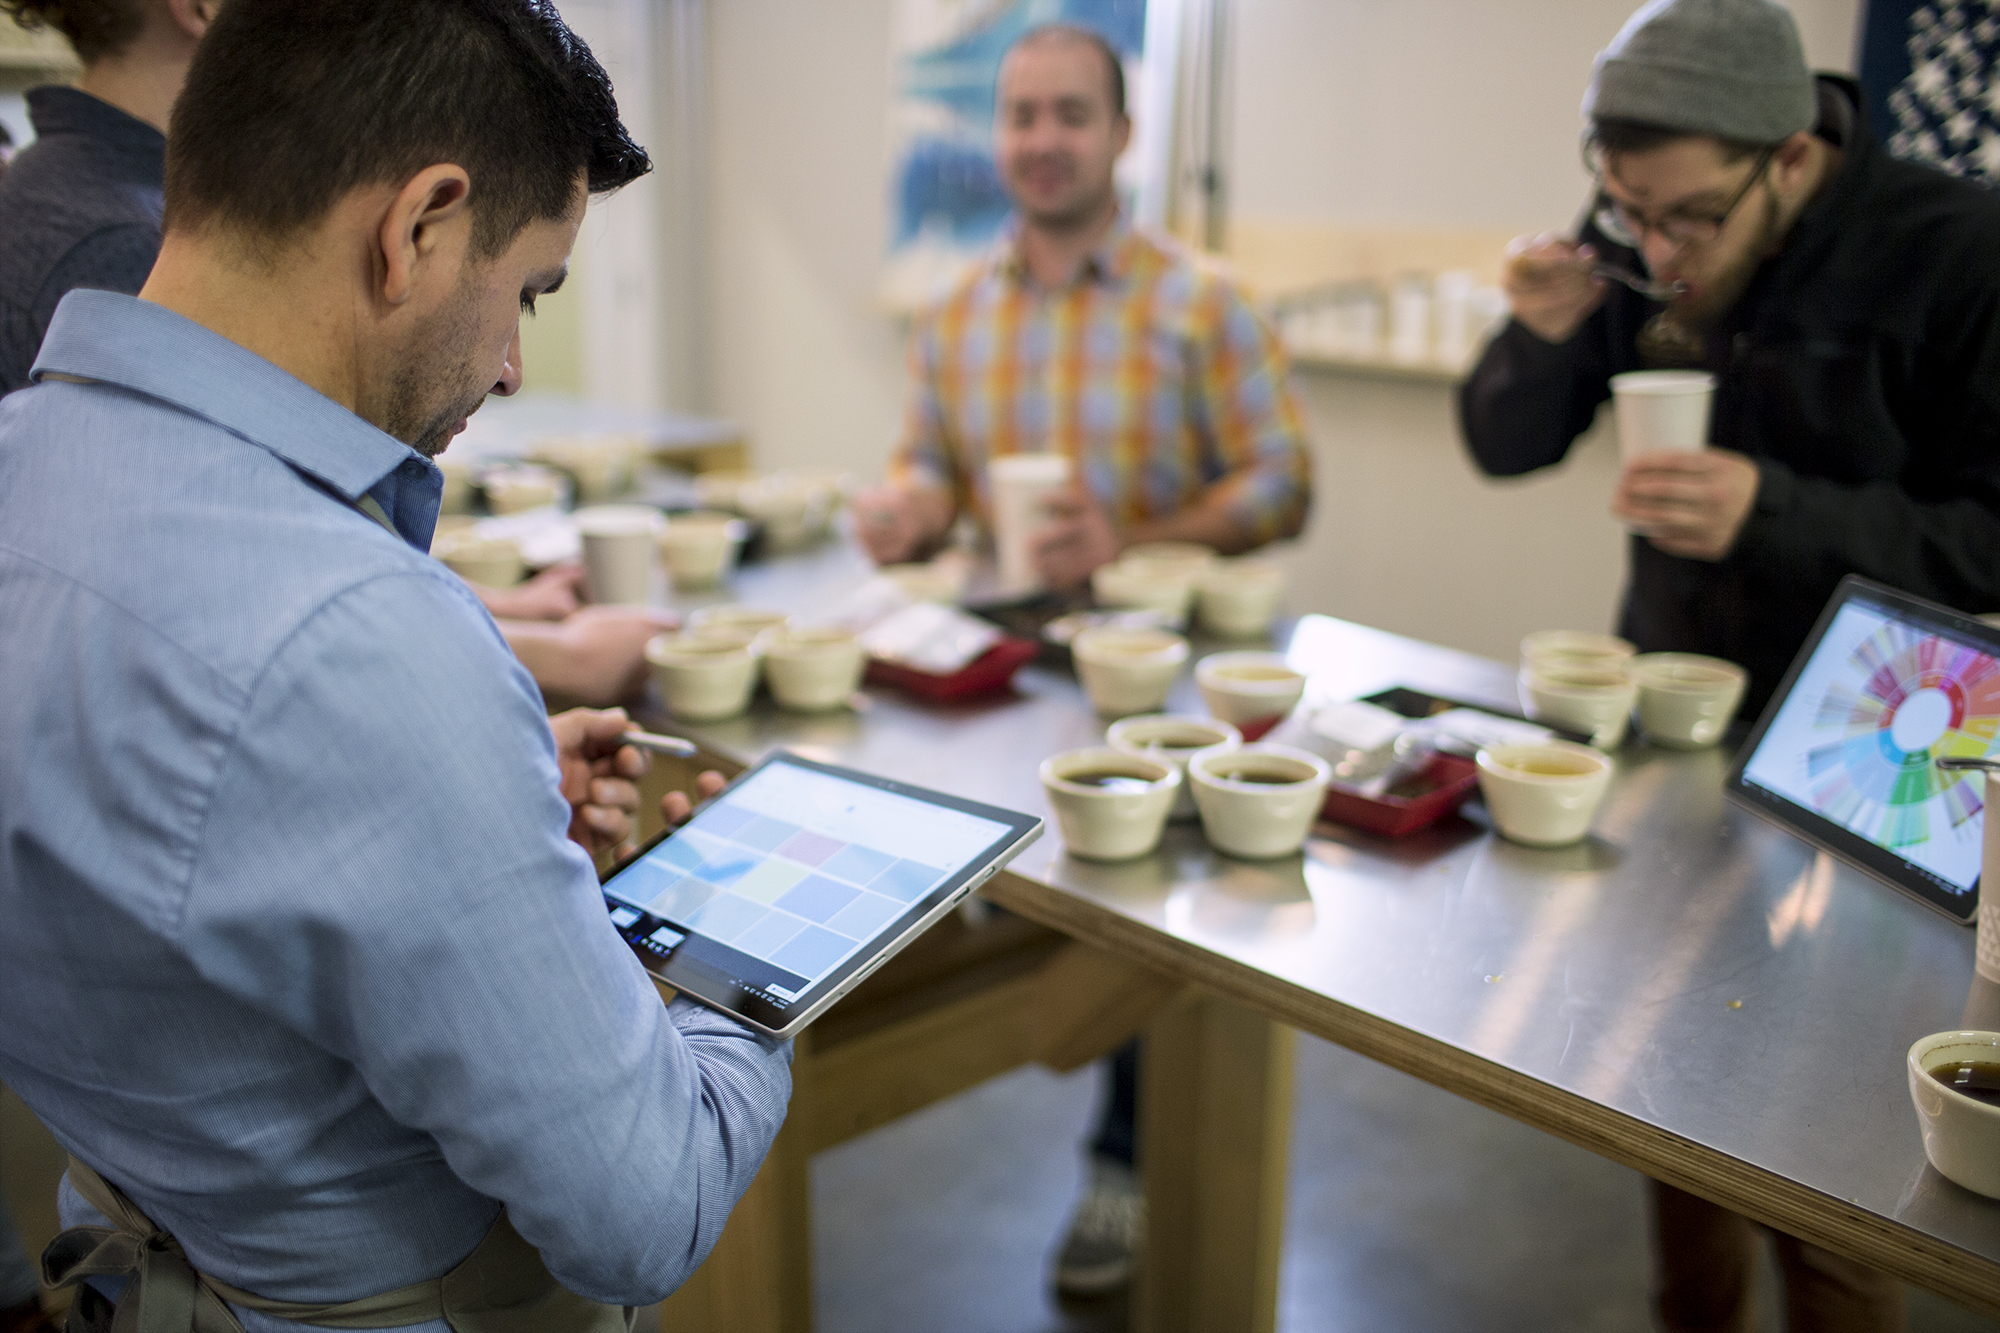 Customers tasting coffee while employee collects data from them